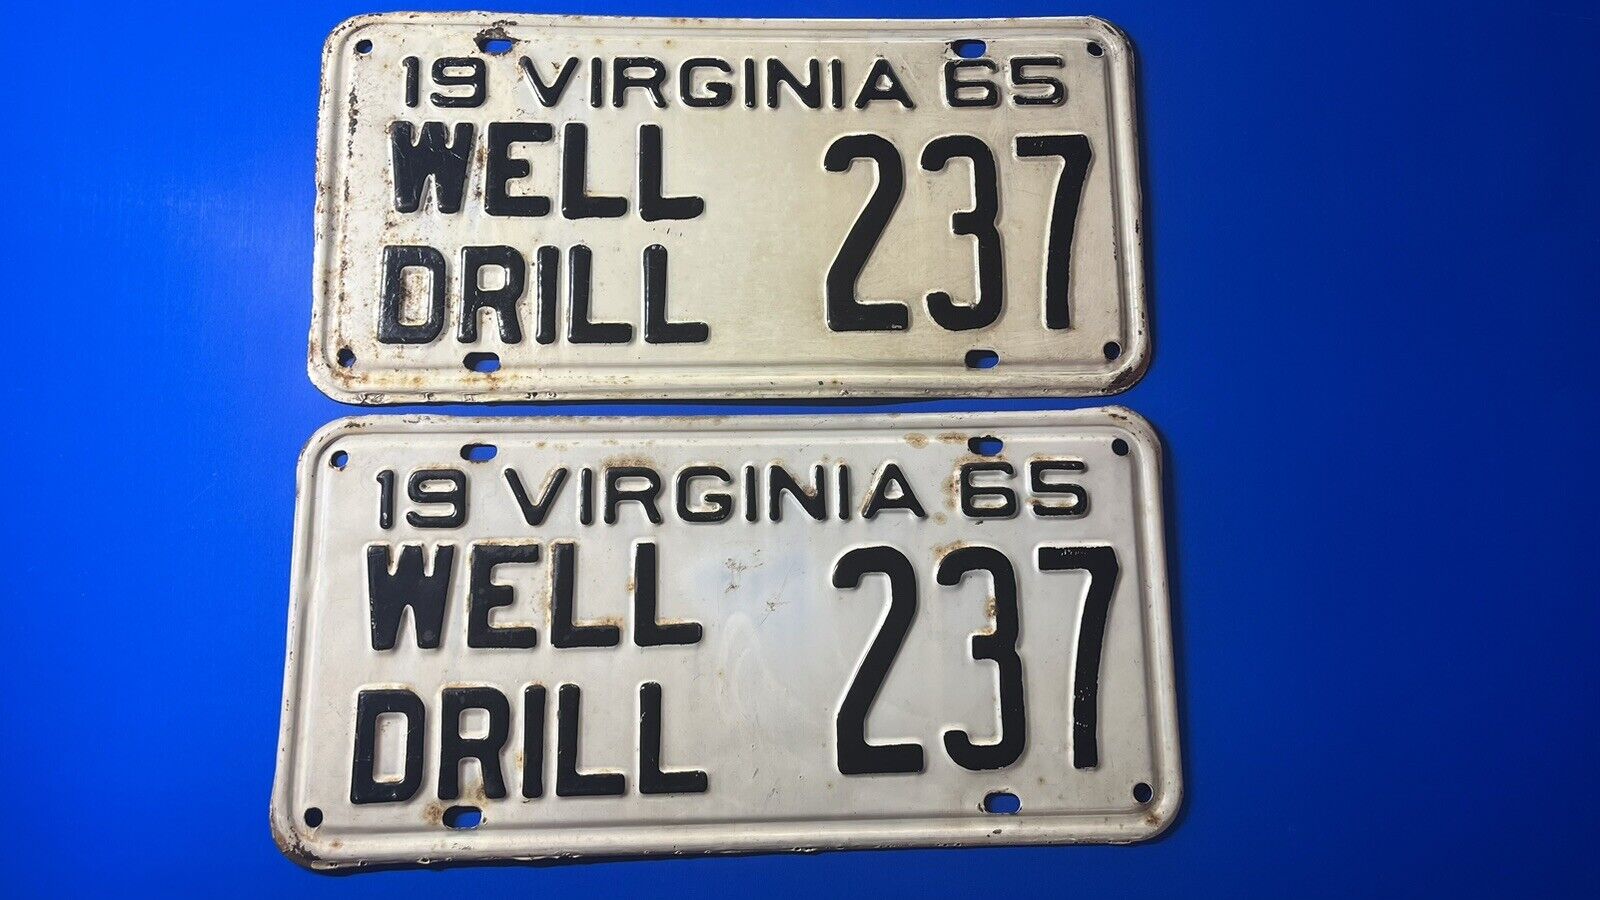 Virginia License Plate 1965 Well Drill Set